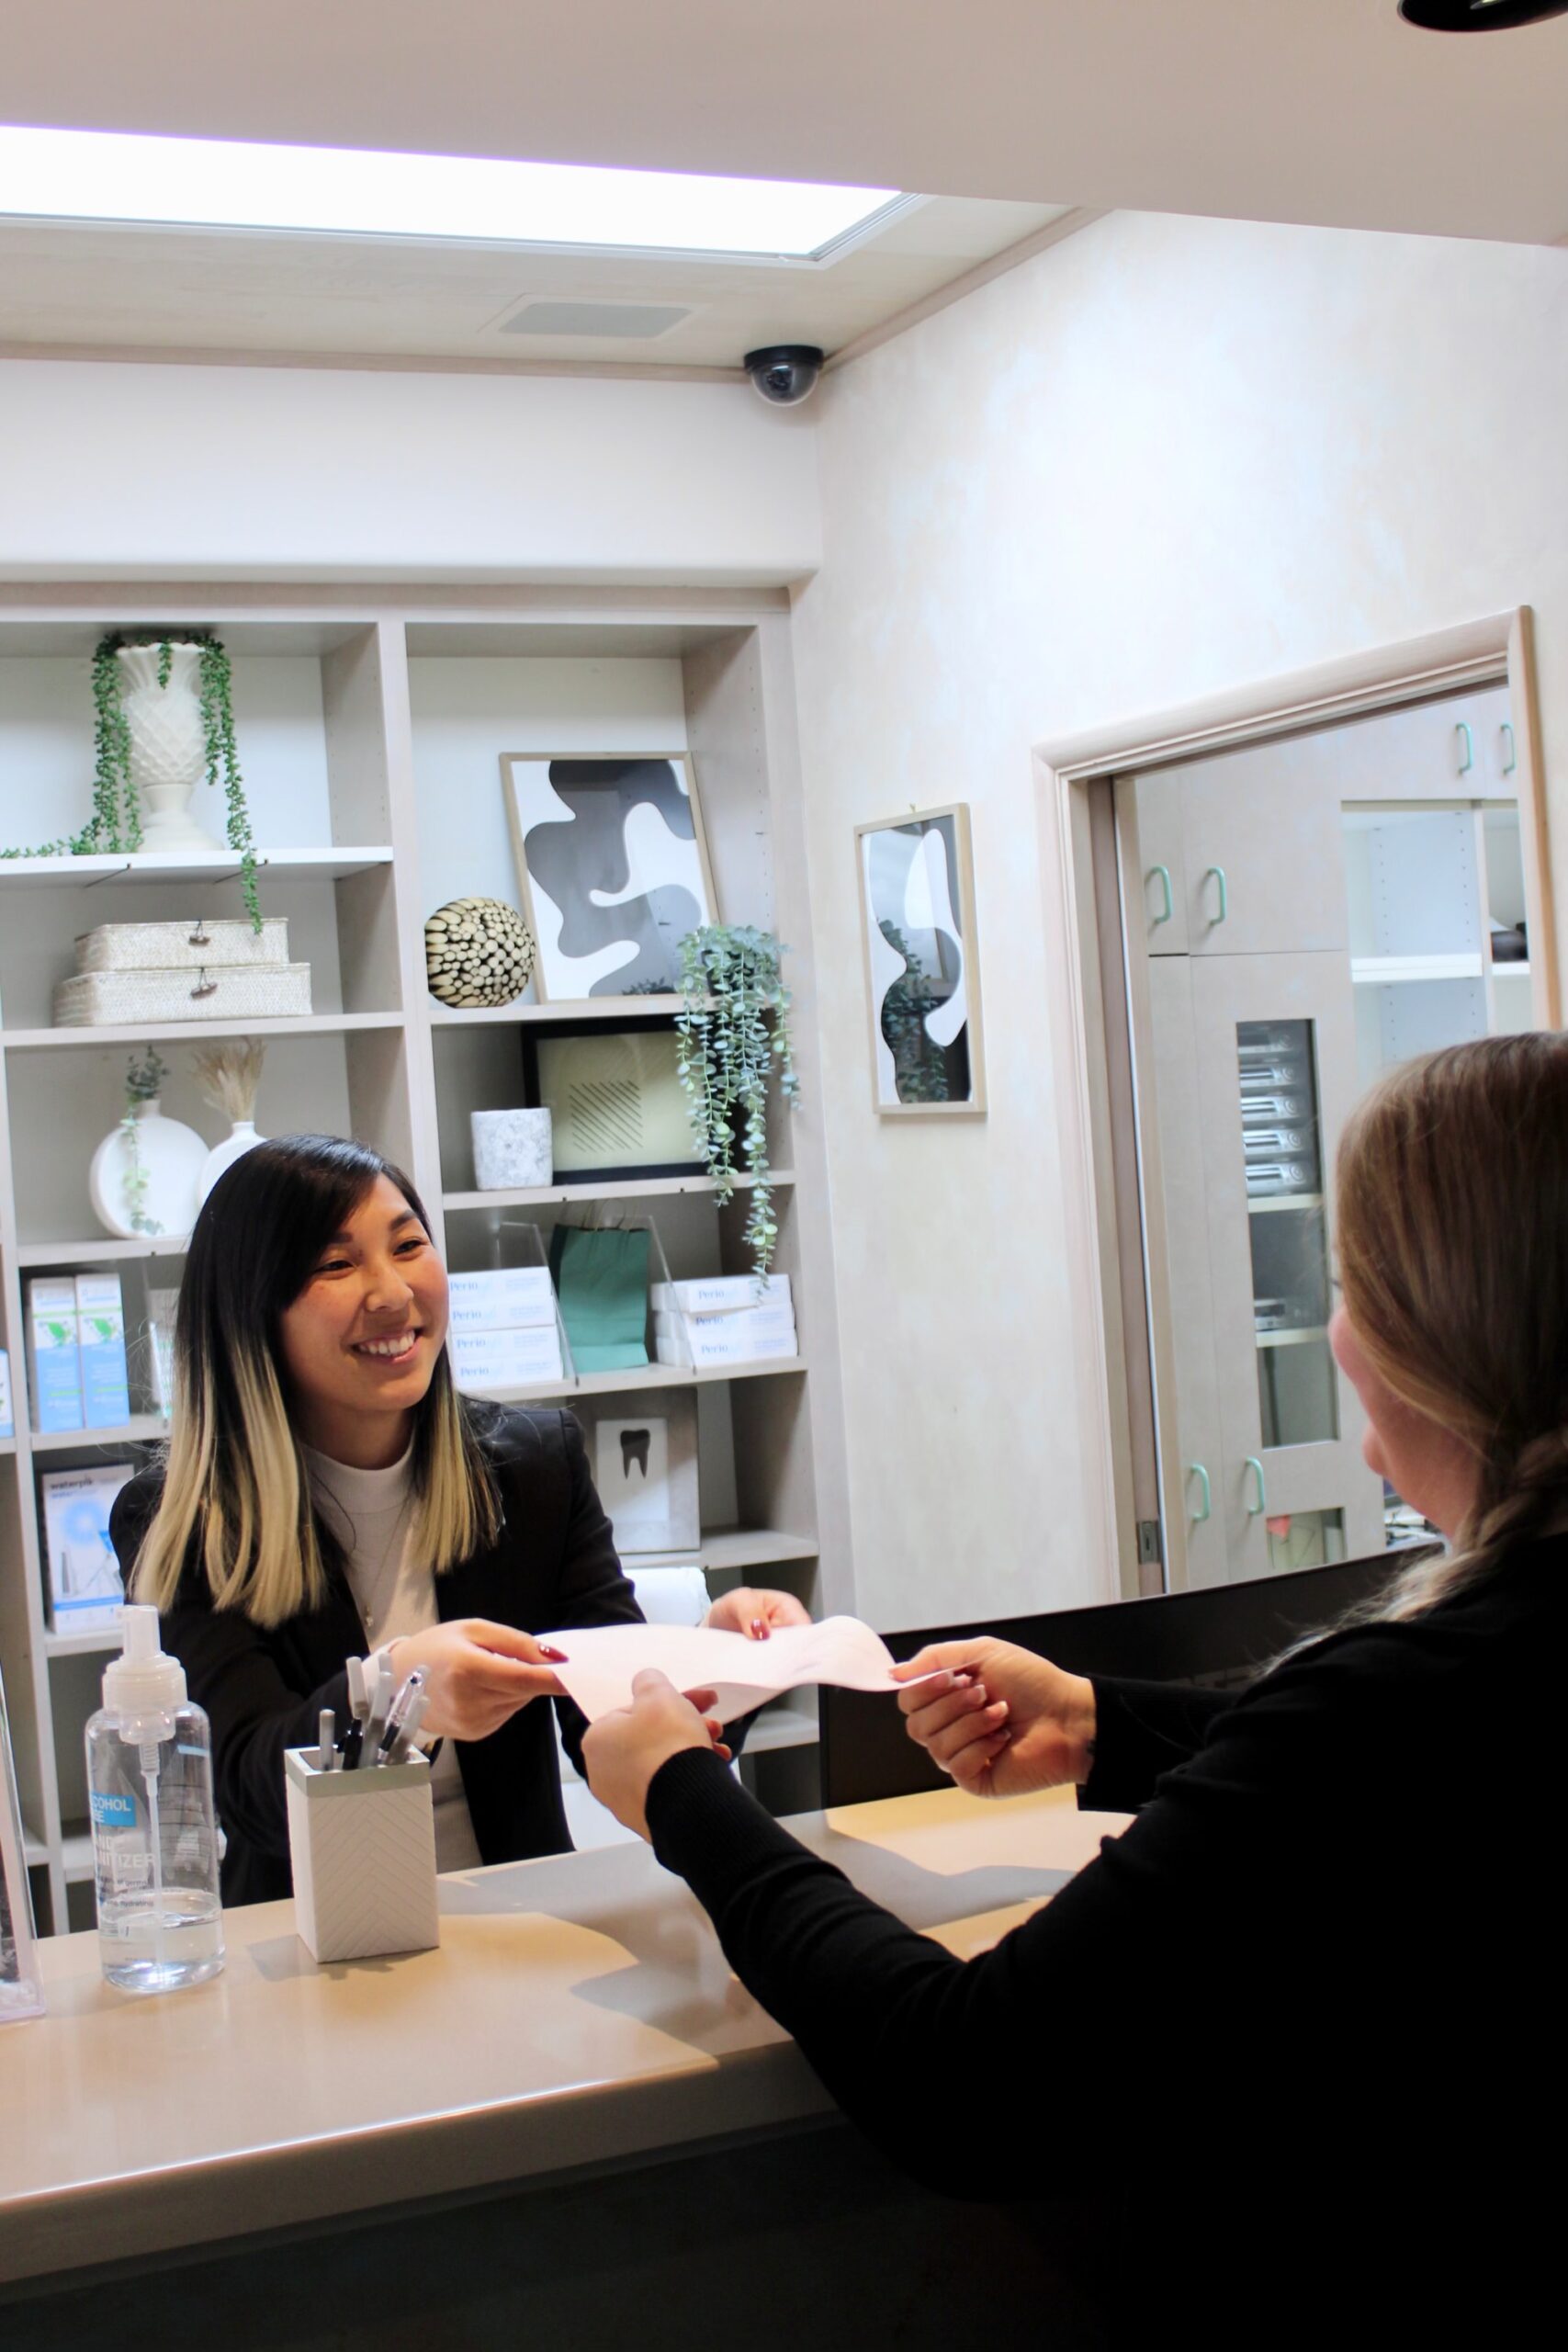 Receptionist handing paperwork to a patient, demonstrating efficient patient service on the First Visit page at Encinitas Dental Art.